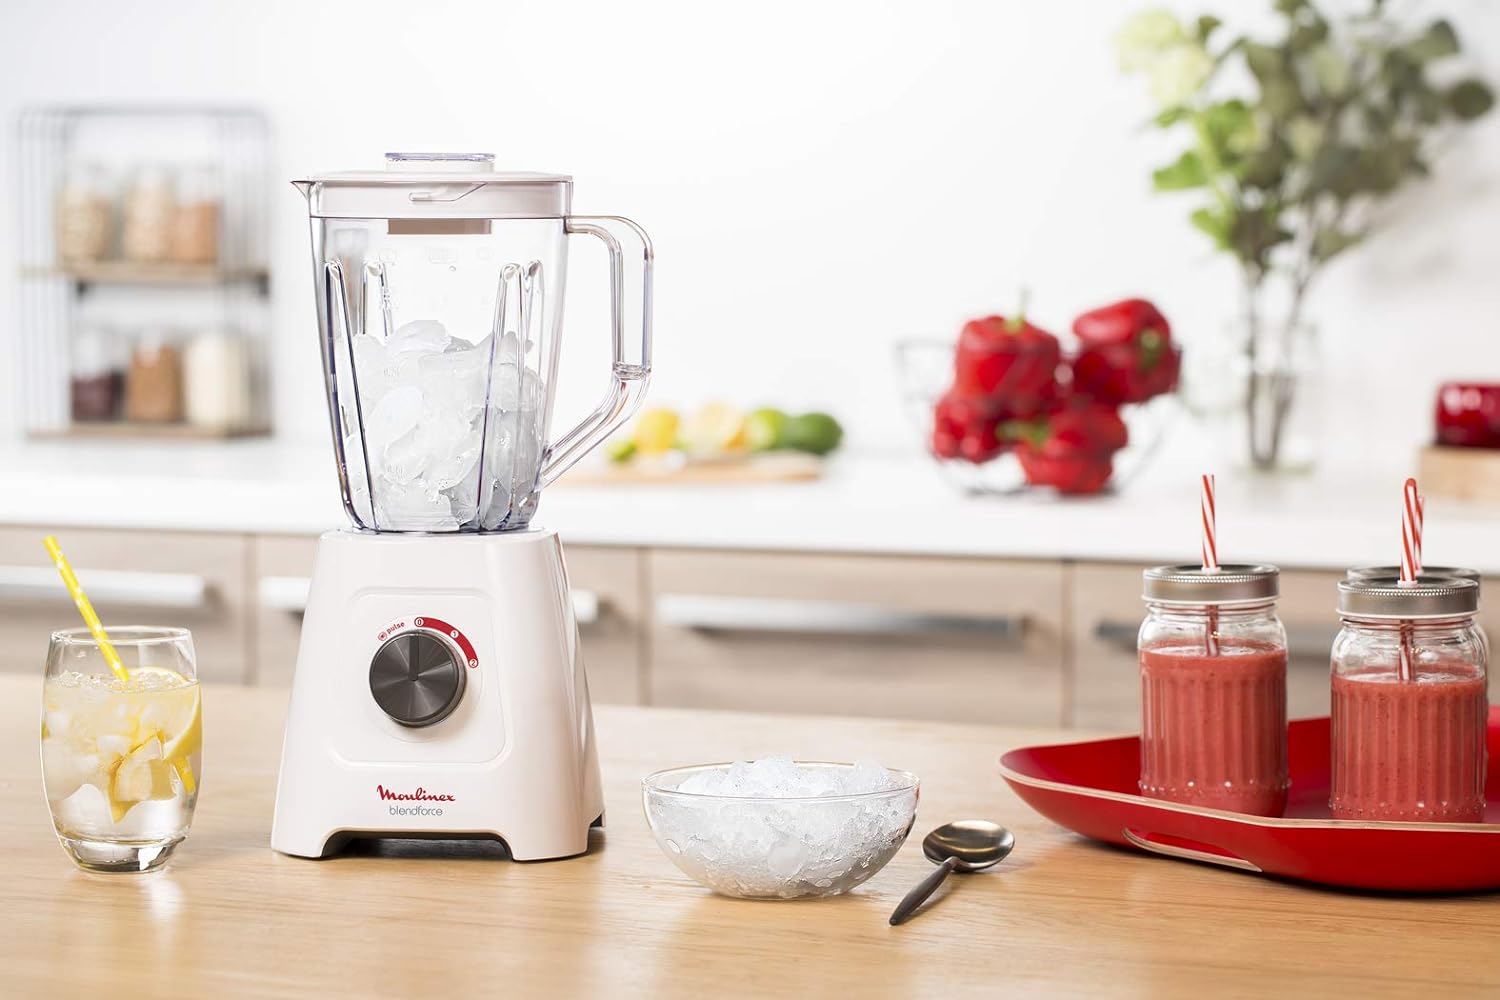 Moulinex Blendeo+ Blender, 1.5 Litre, With Ice CRush Technology & 2 Grinder And Chopper Accessories, 450 Watts, White, Plastic, Lm2B3127